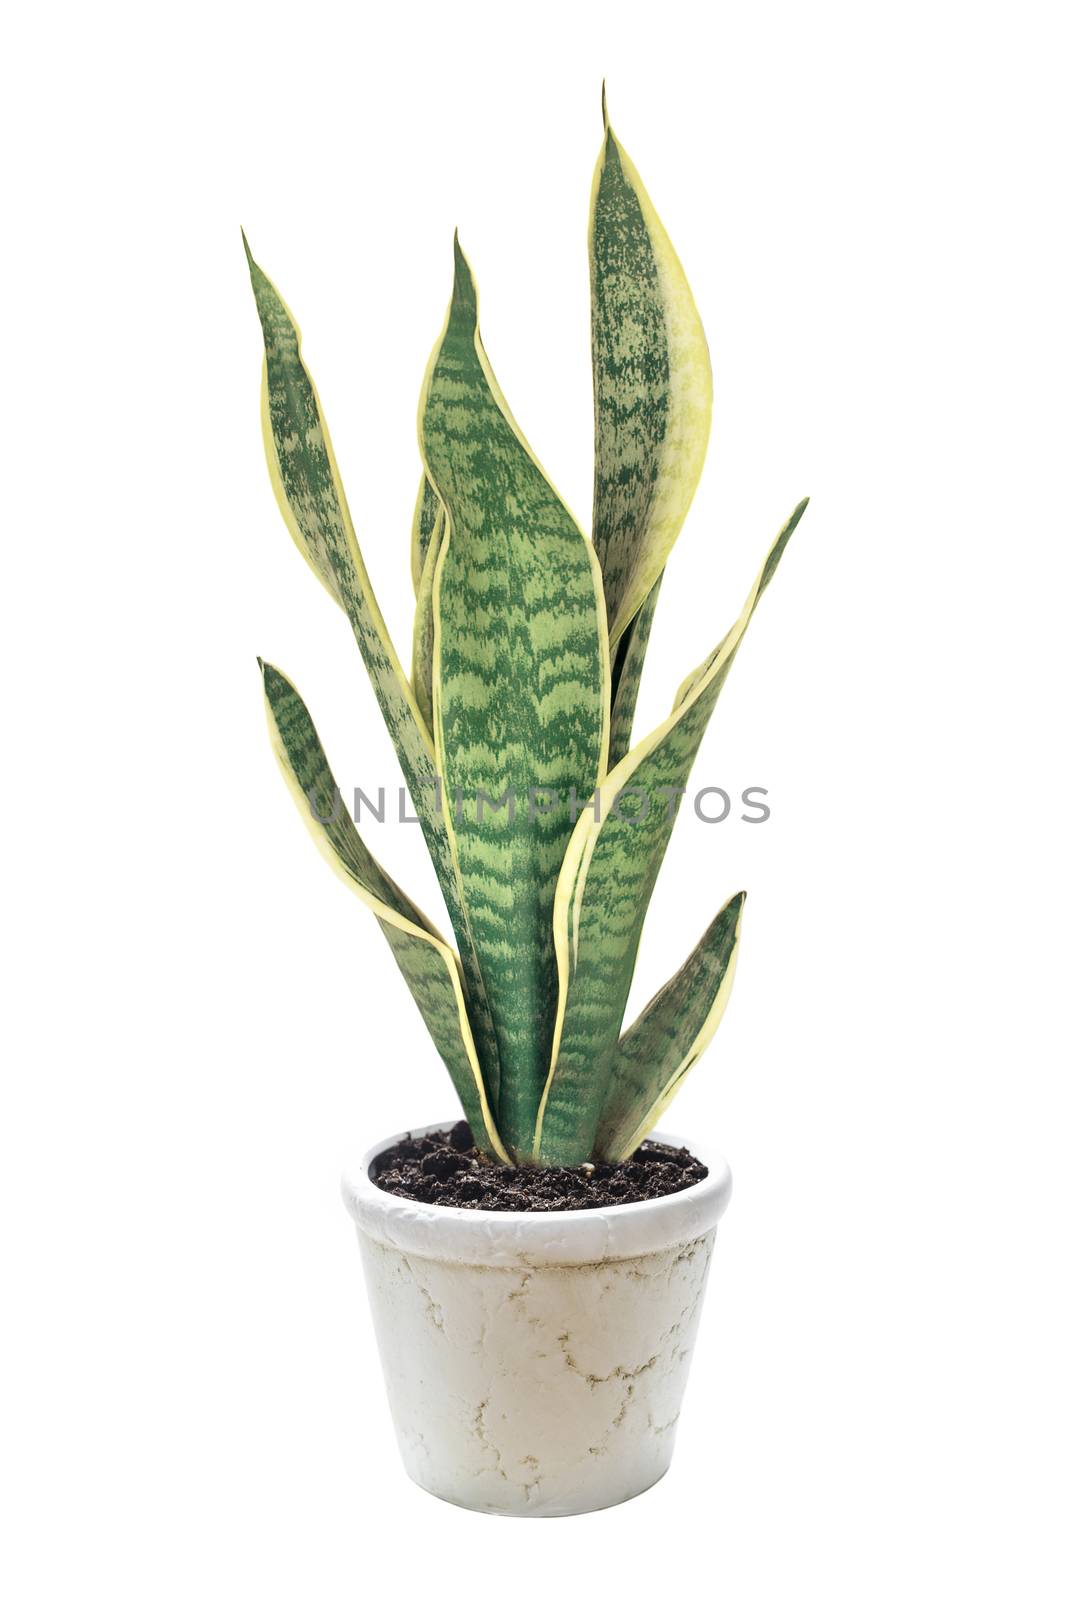 House plant Sansevieria in the white ceramic flower pot isolated on a white background